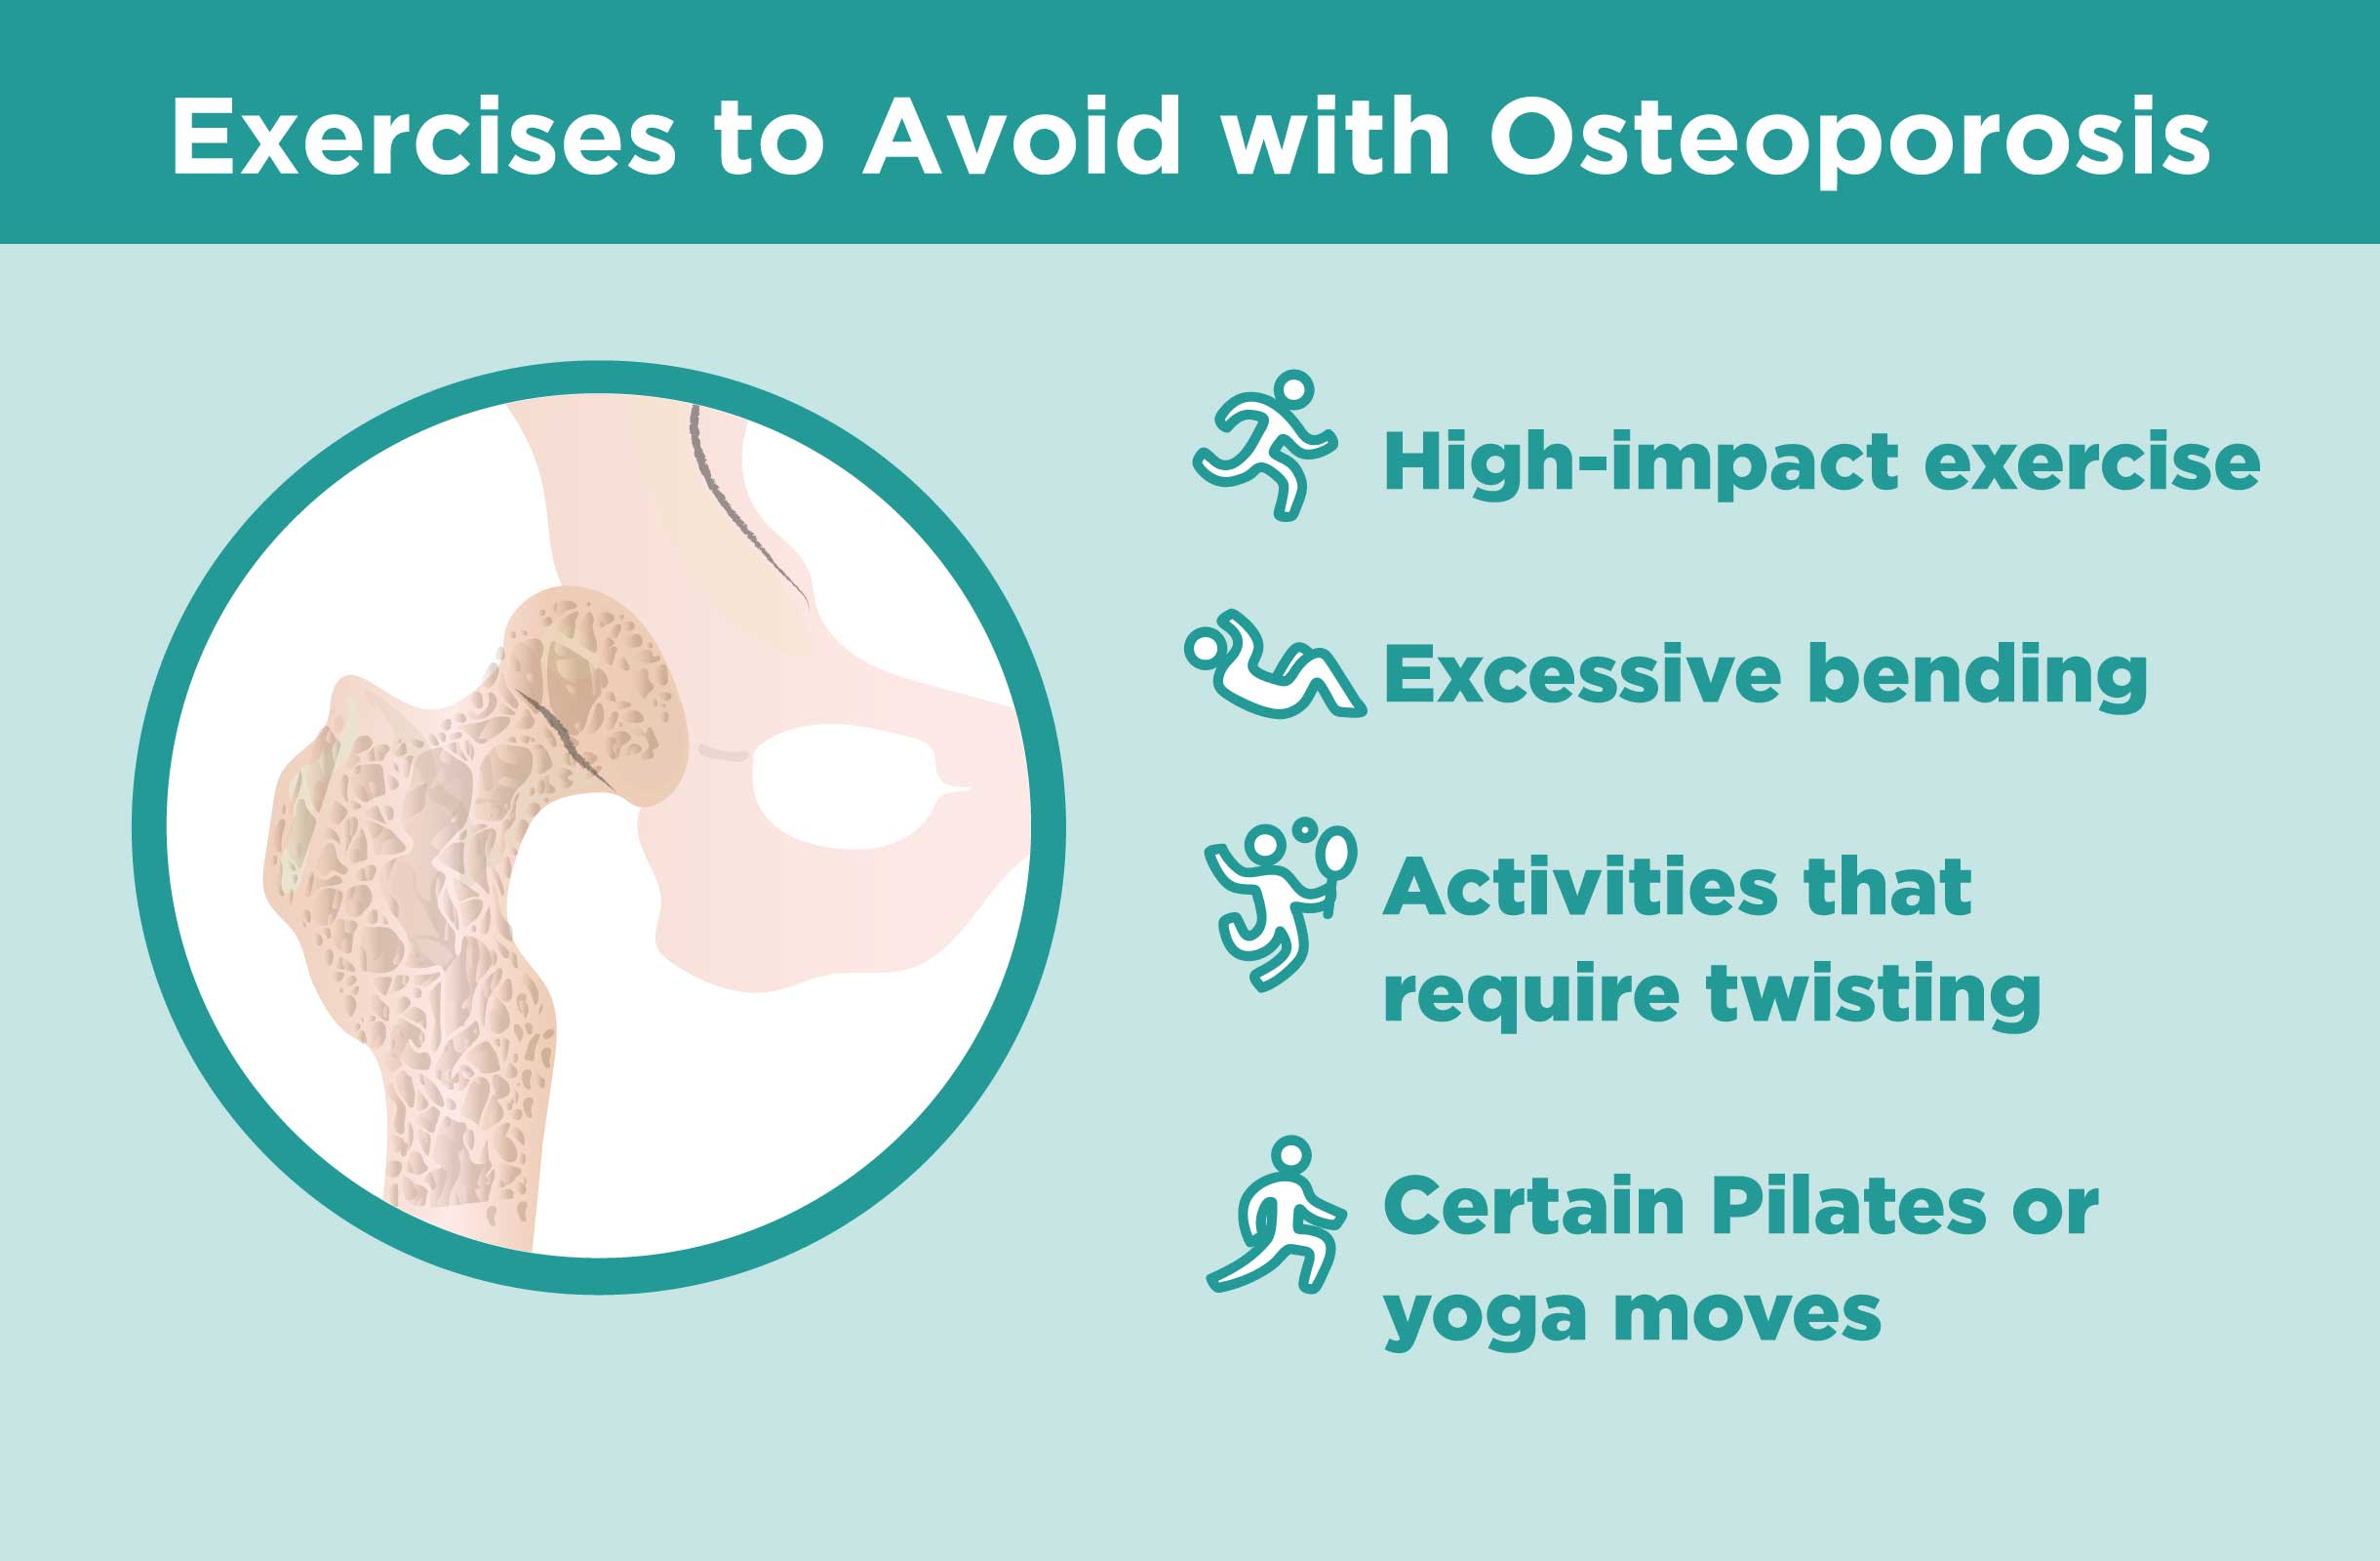 Exercises to Avoid with Osteoporosis: Workouts to Skip, How to Stay Safe